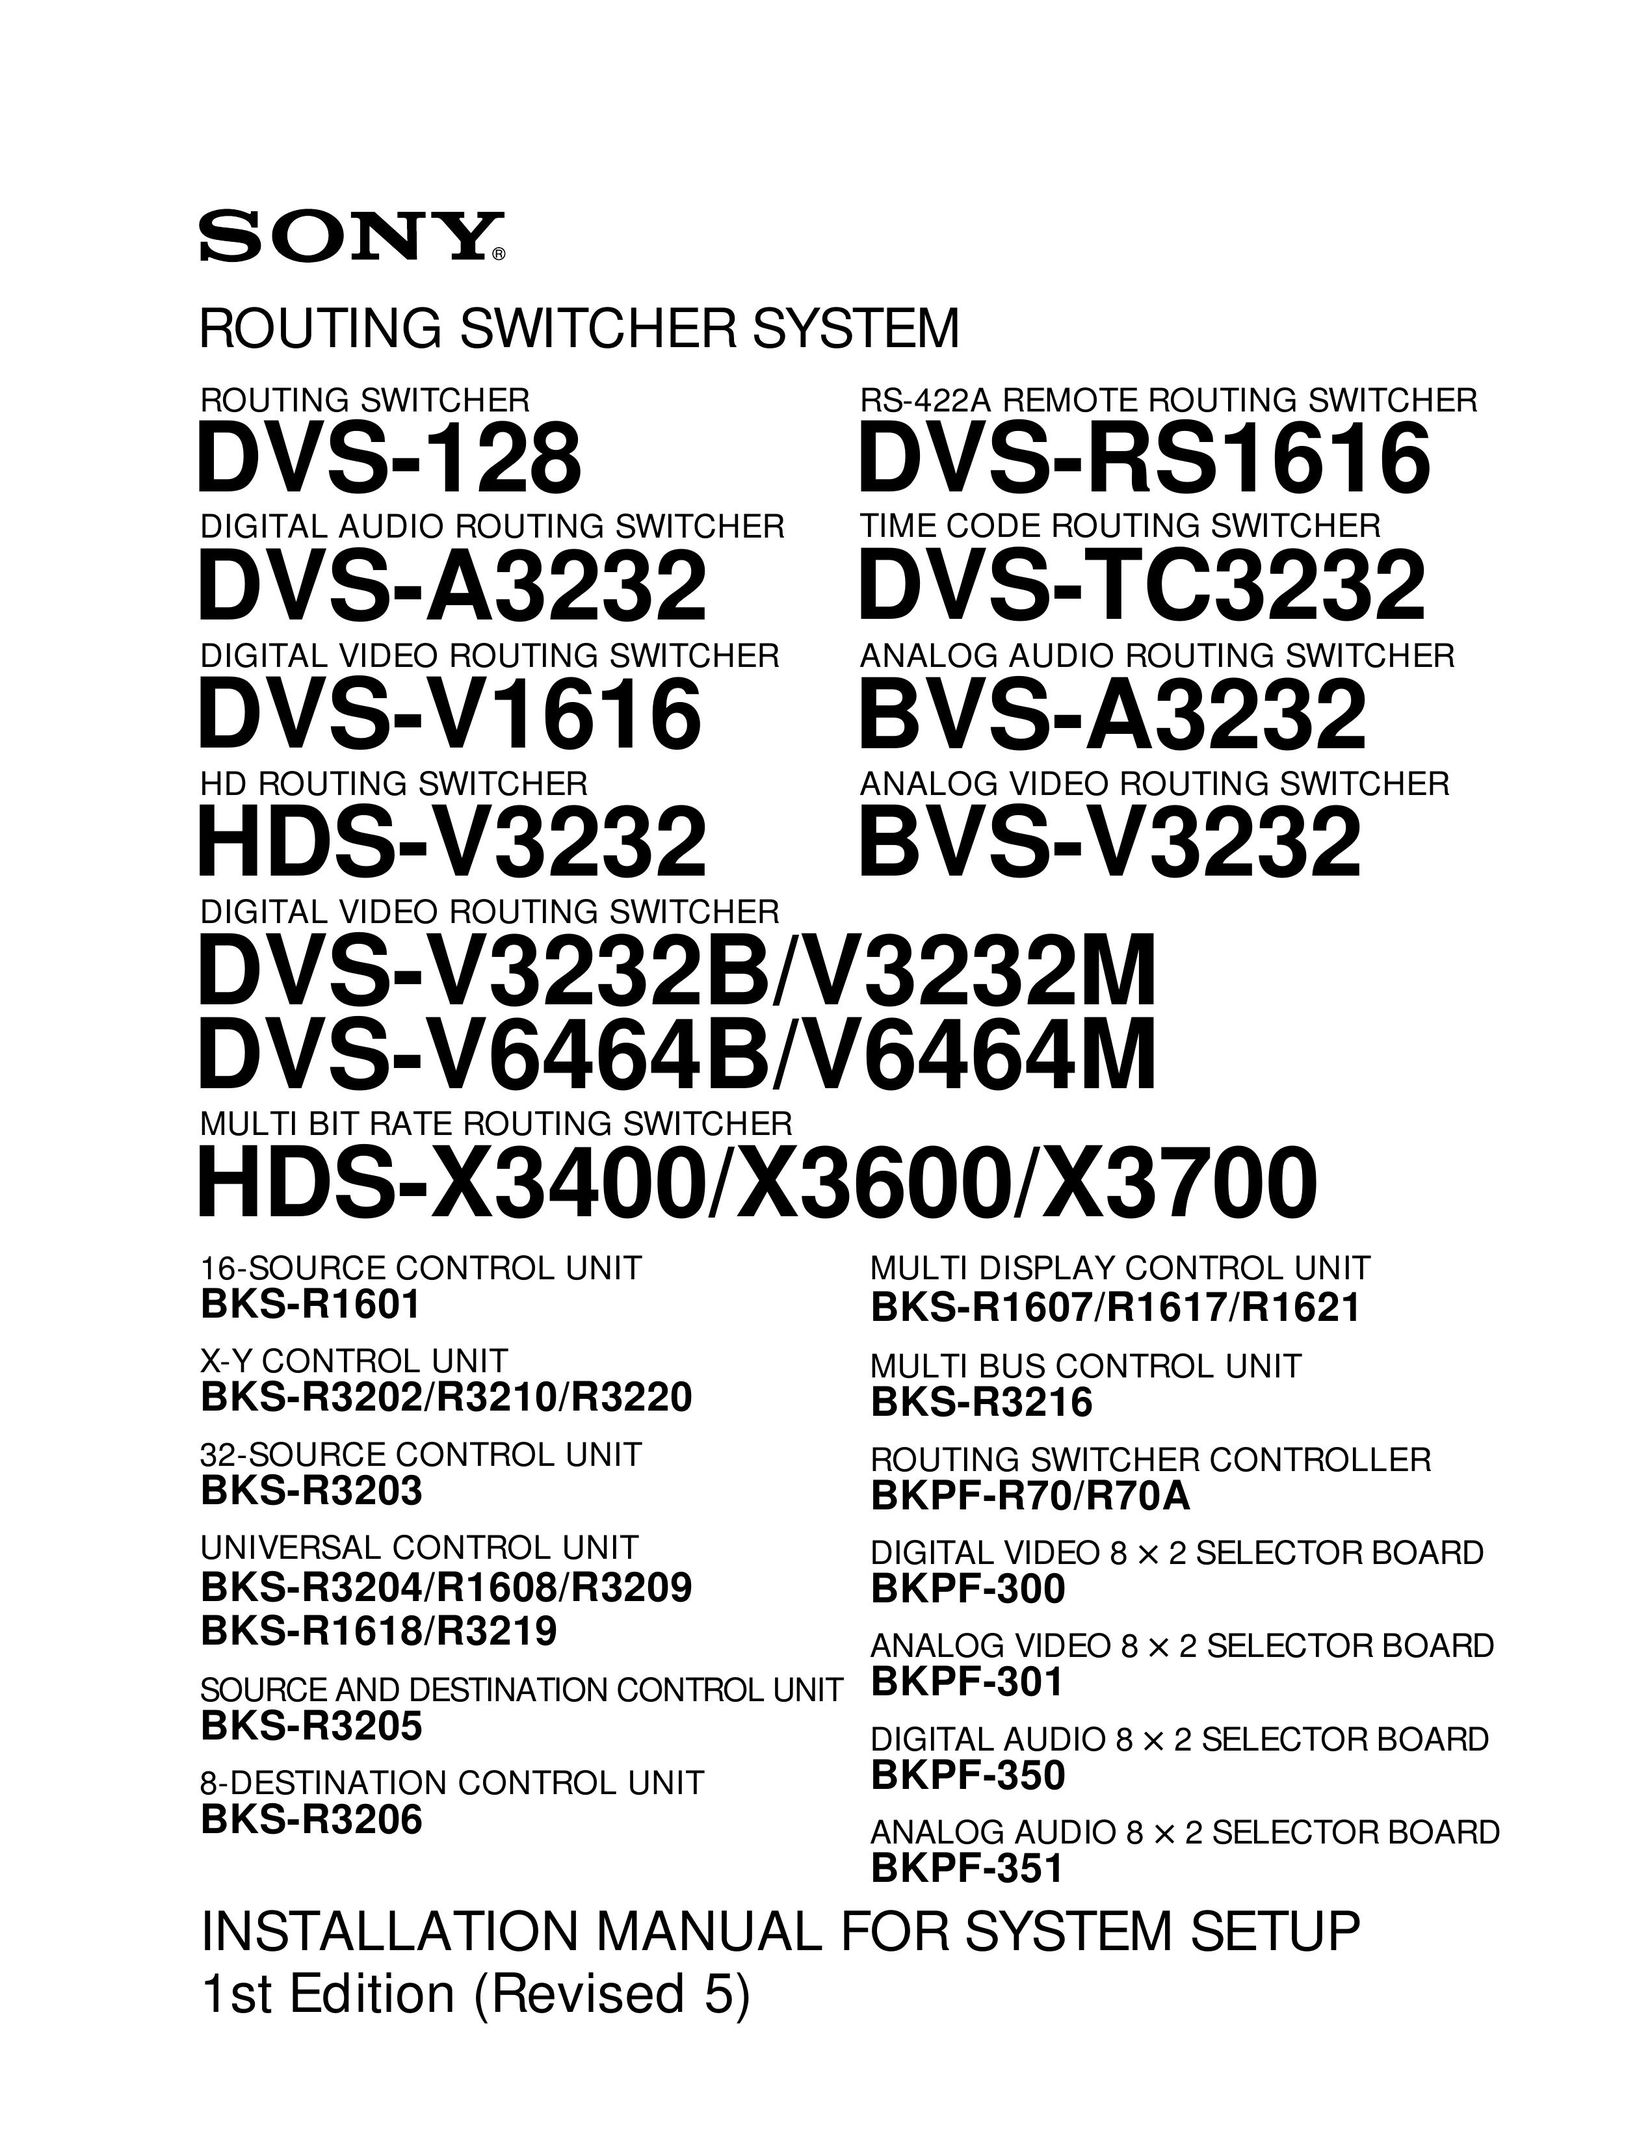 Sony DVS-RS1616 Switch User Manual